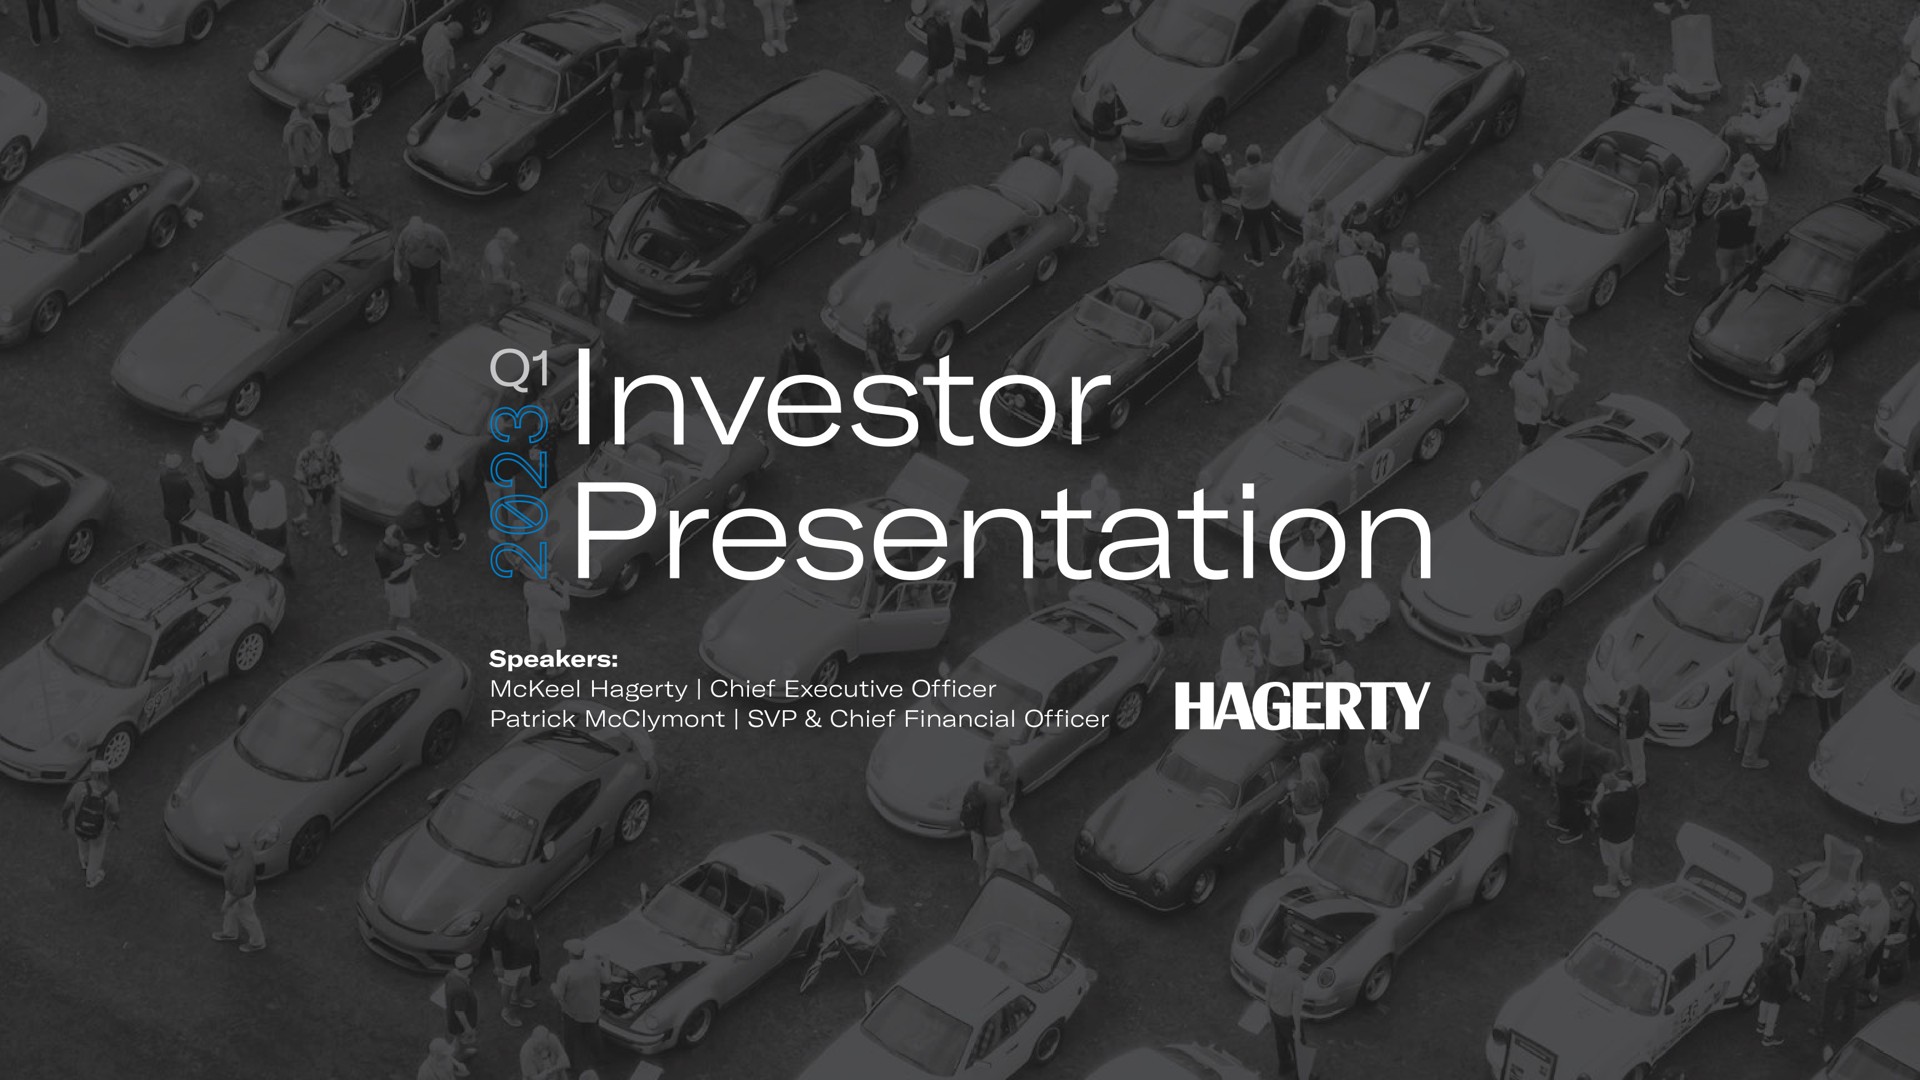 investor presentation speakers is chief executive officer chief officer | Hagerty